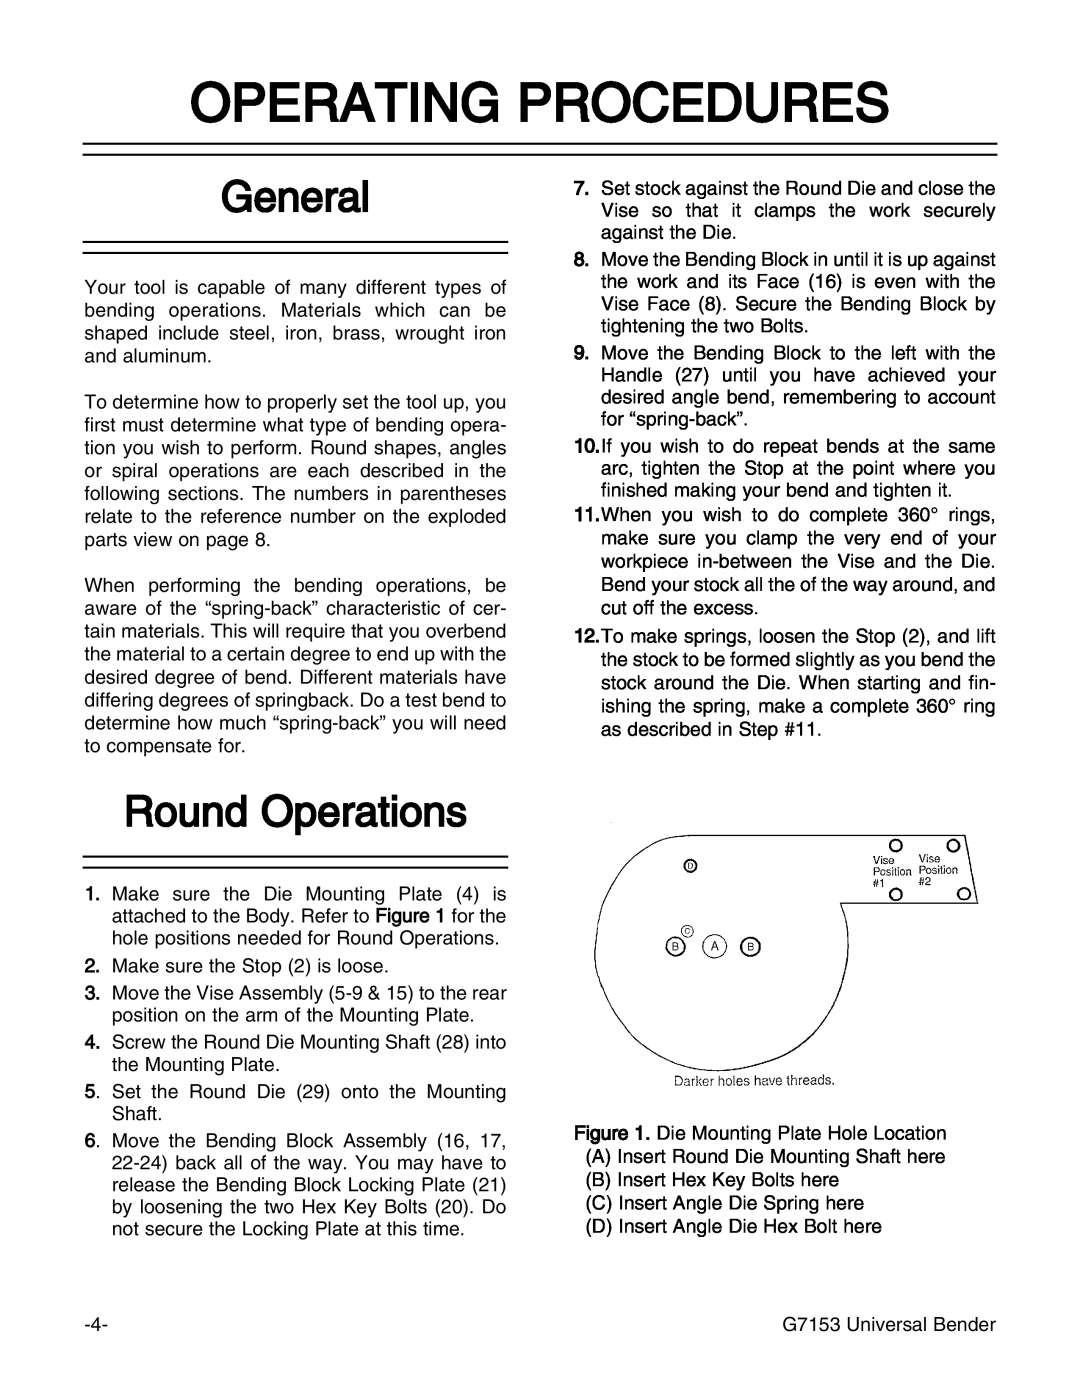 Grizzly G7153 manual Operating Procedures, General, Round Operations 